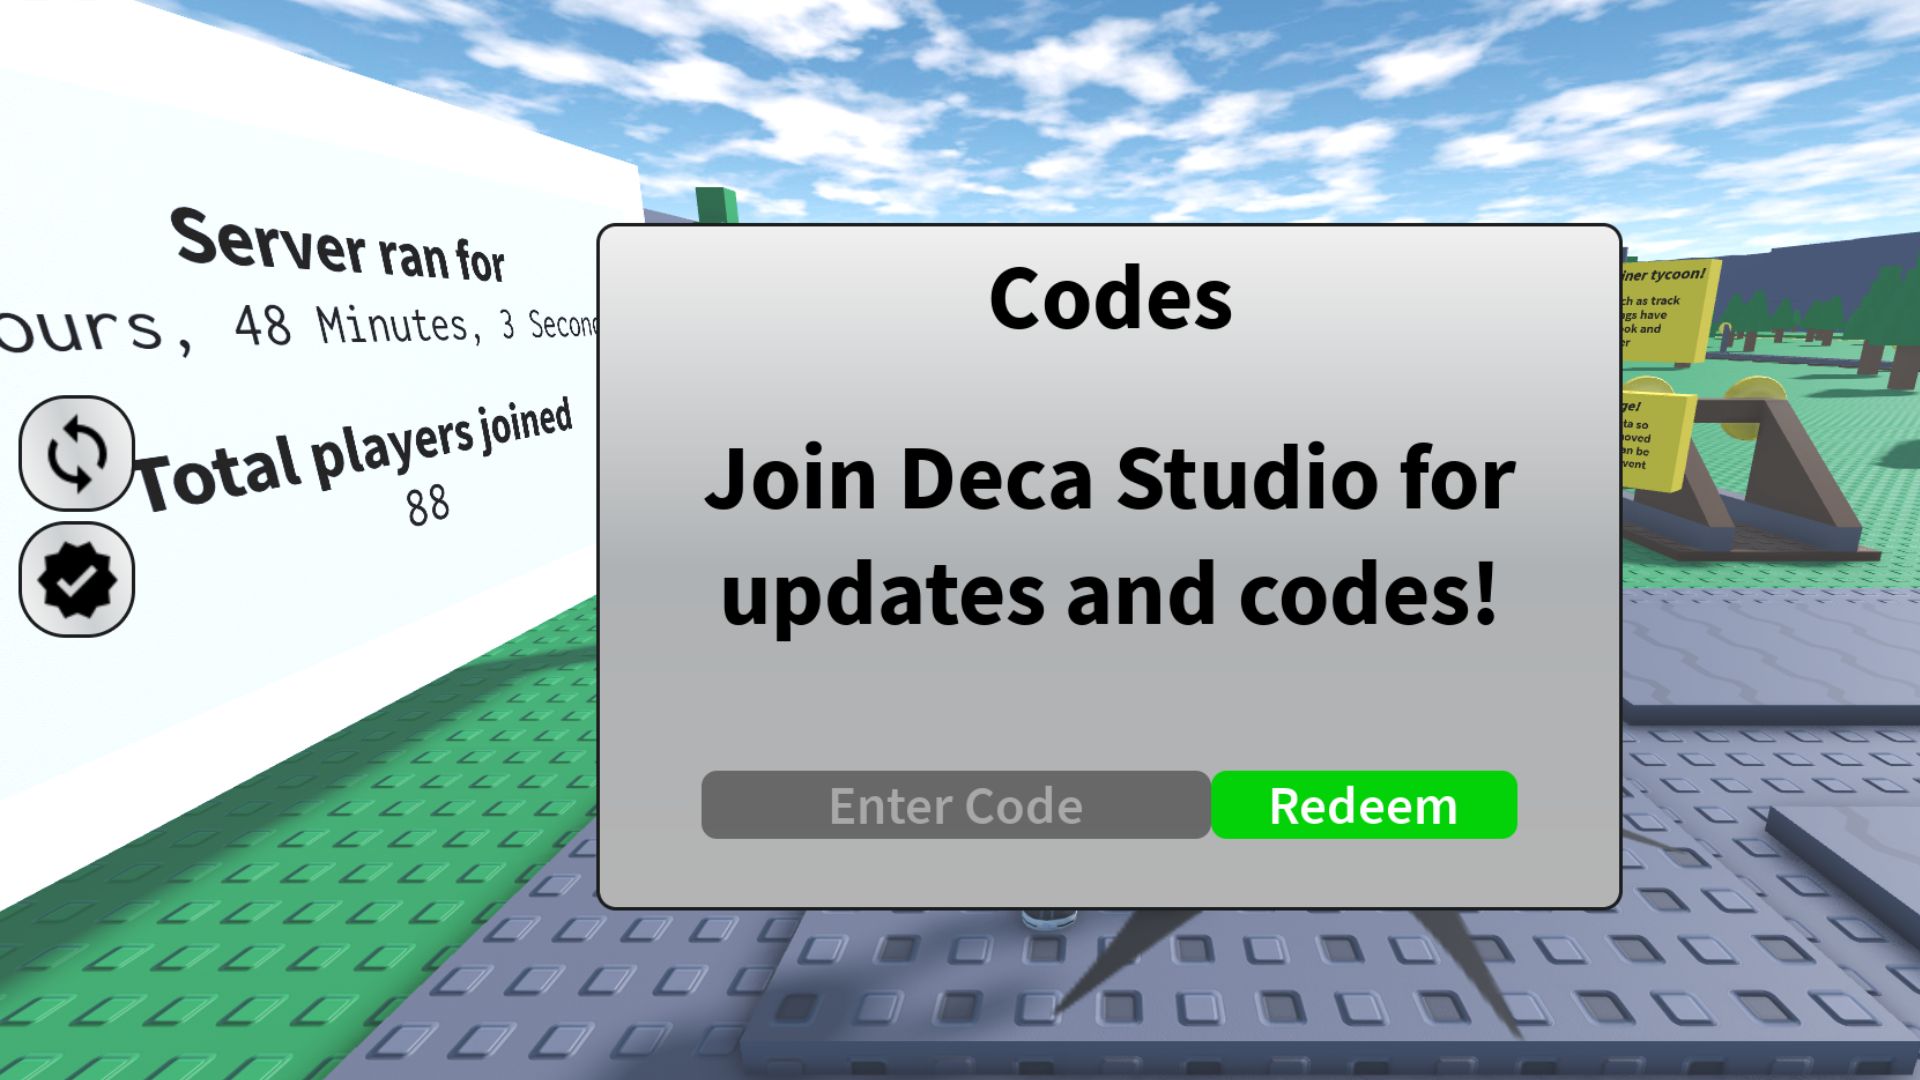 All *New* Mining Factory Tycoon Codes 2023  Codes for Mining Factory Tycoon  - Roblox Code 